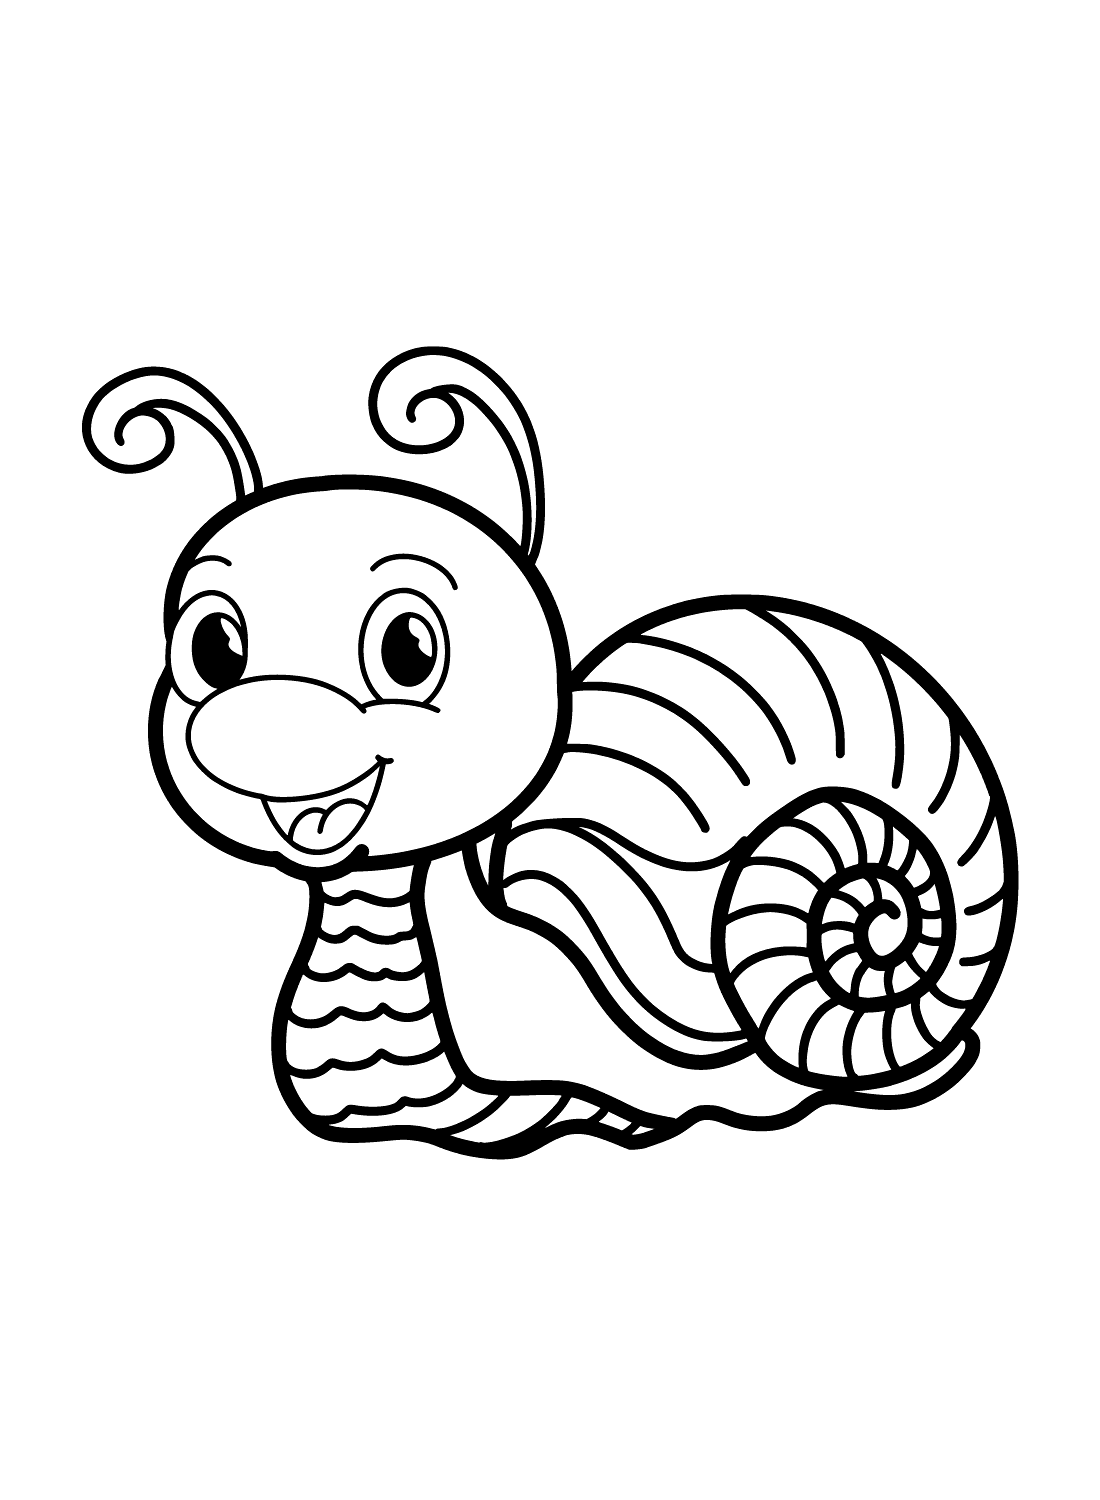 Happy Snail for Kids Coloring Pages